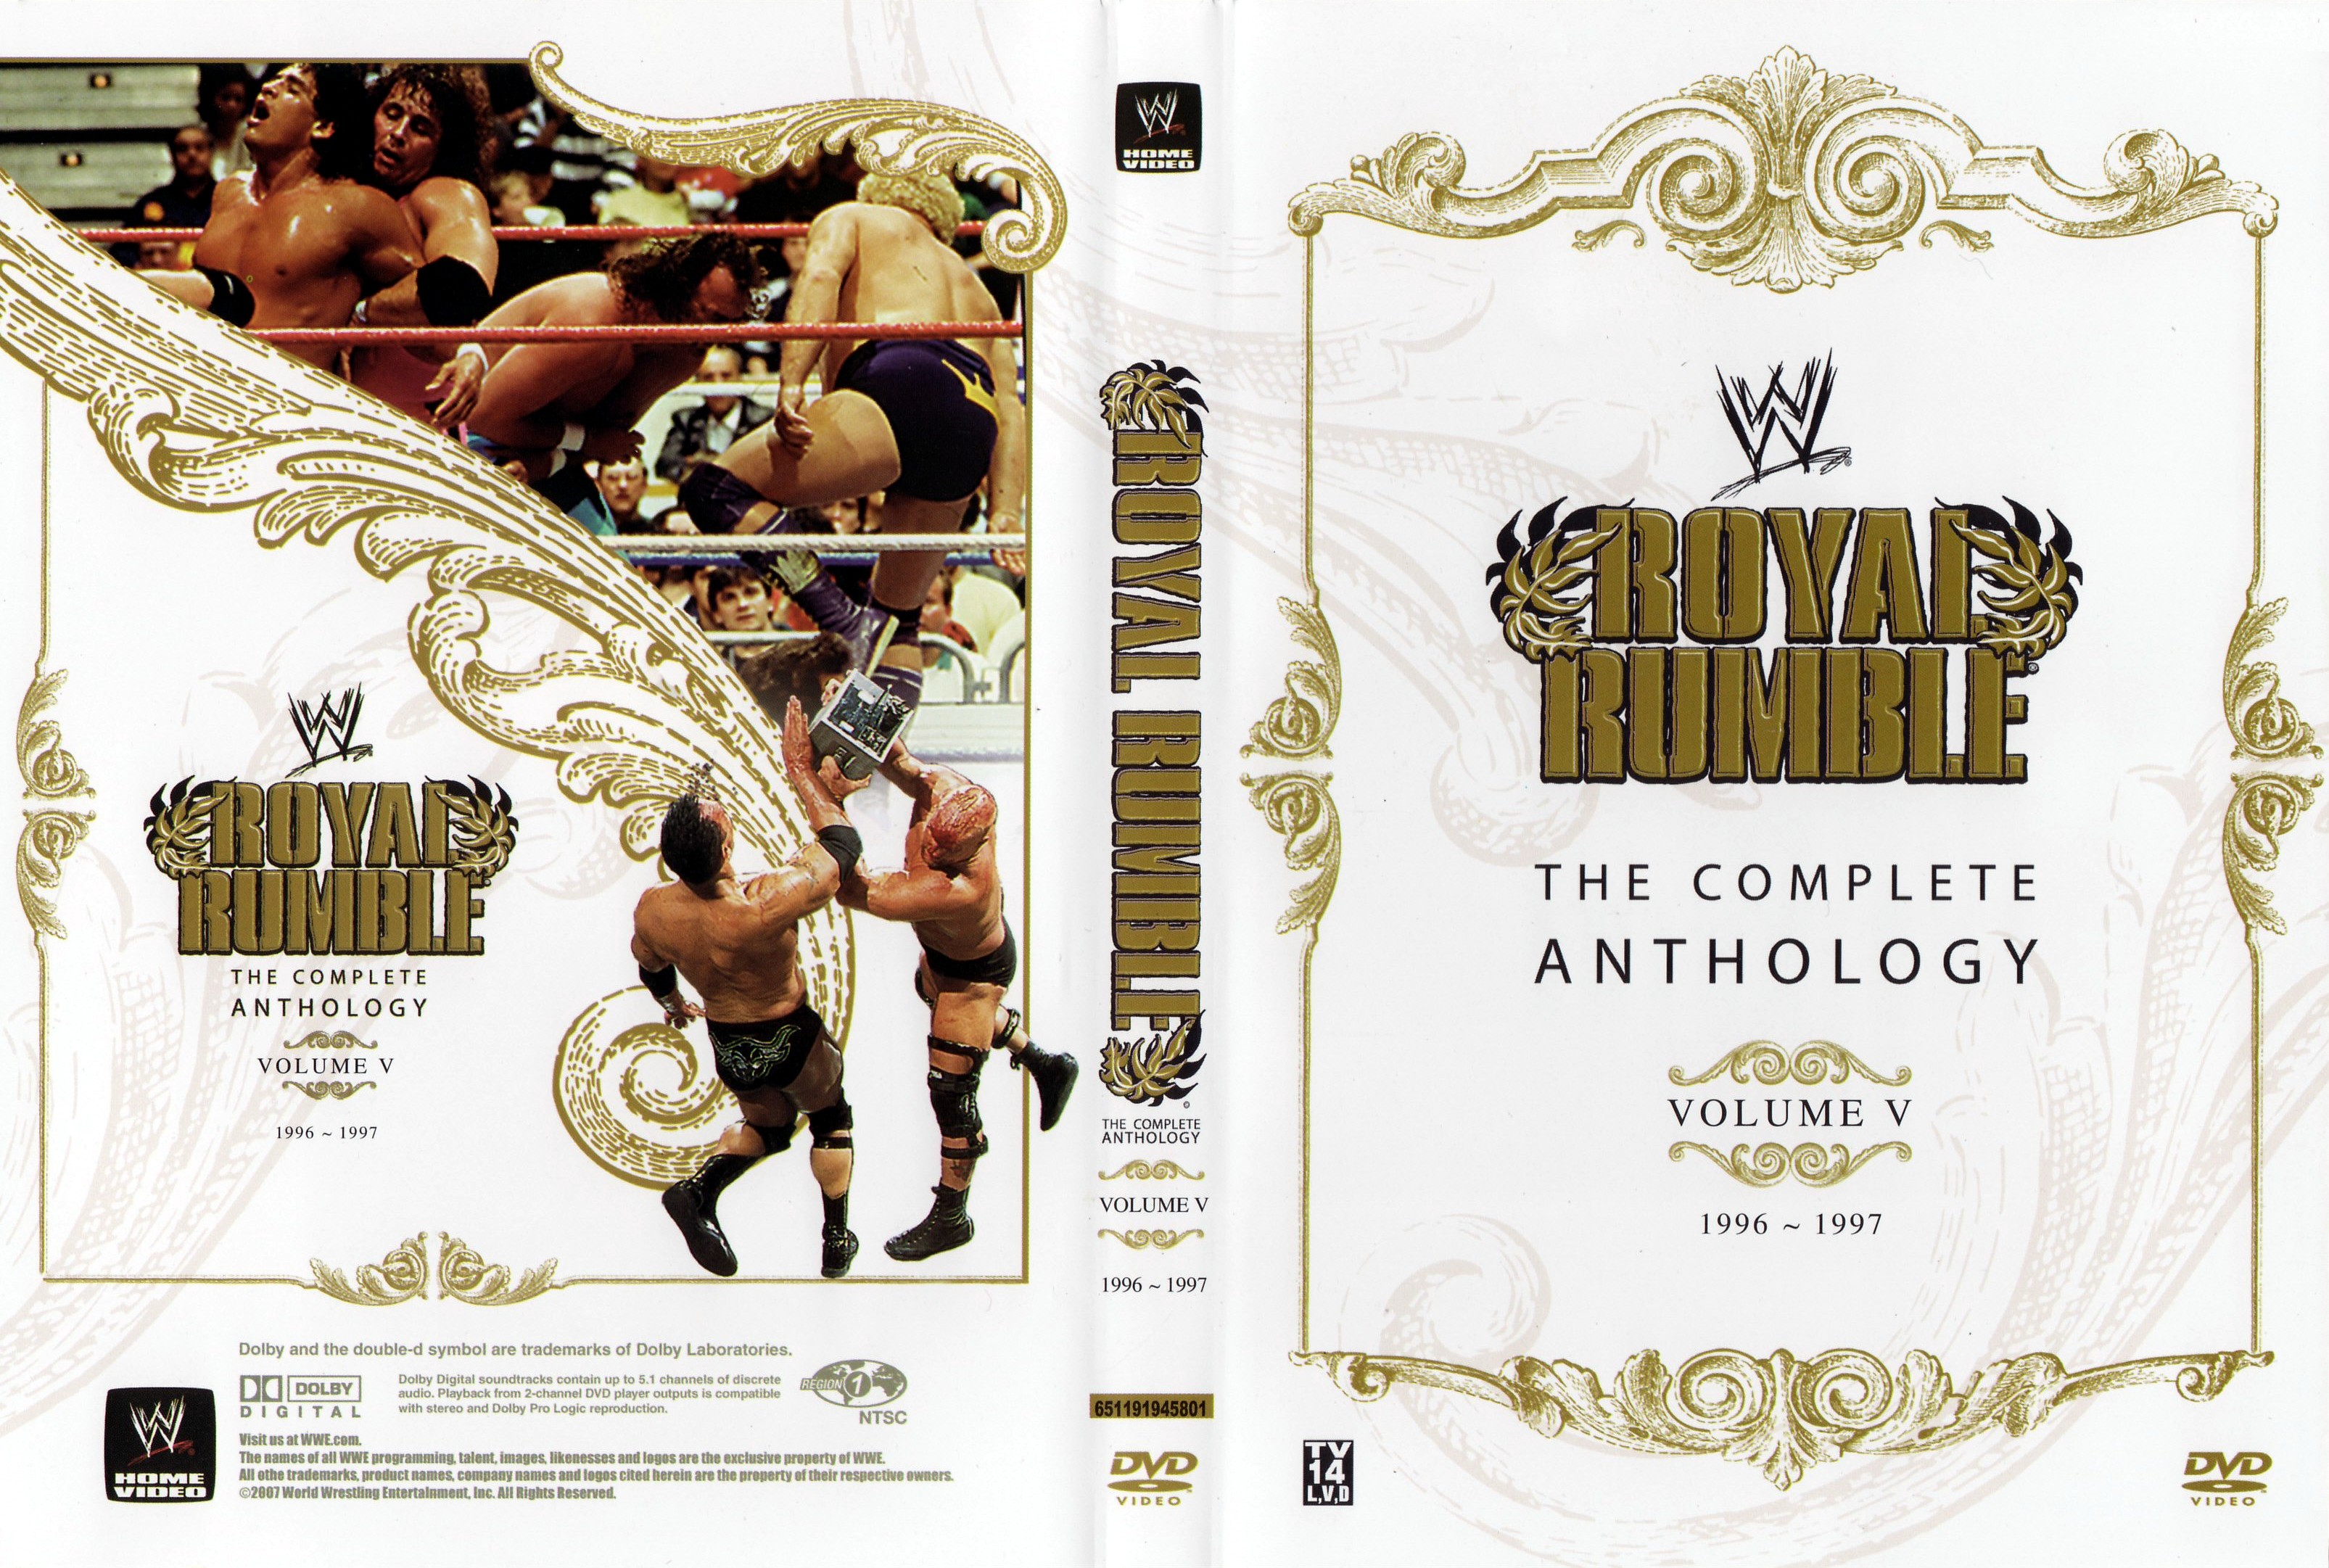 Jaquette DVD WWE Royal Rumble the complete antology vol 05